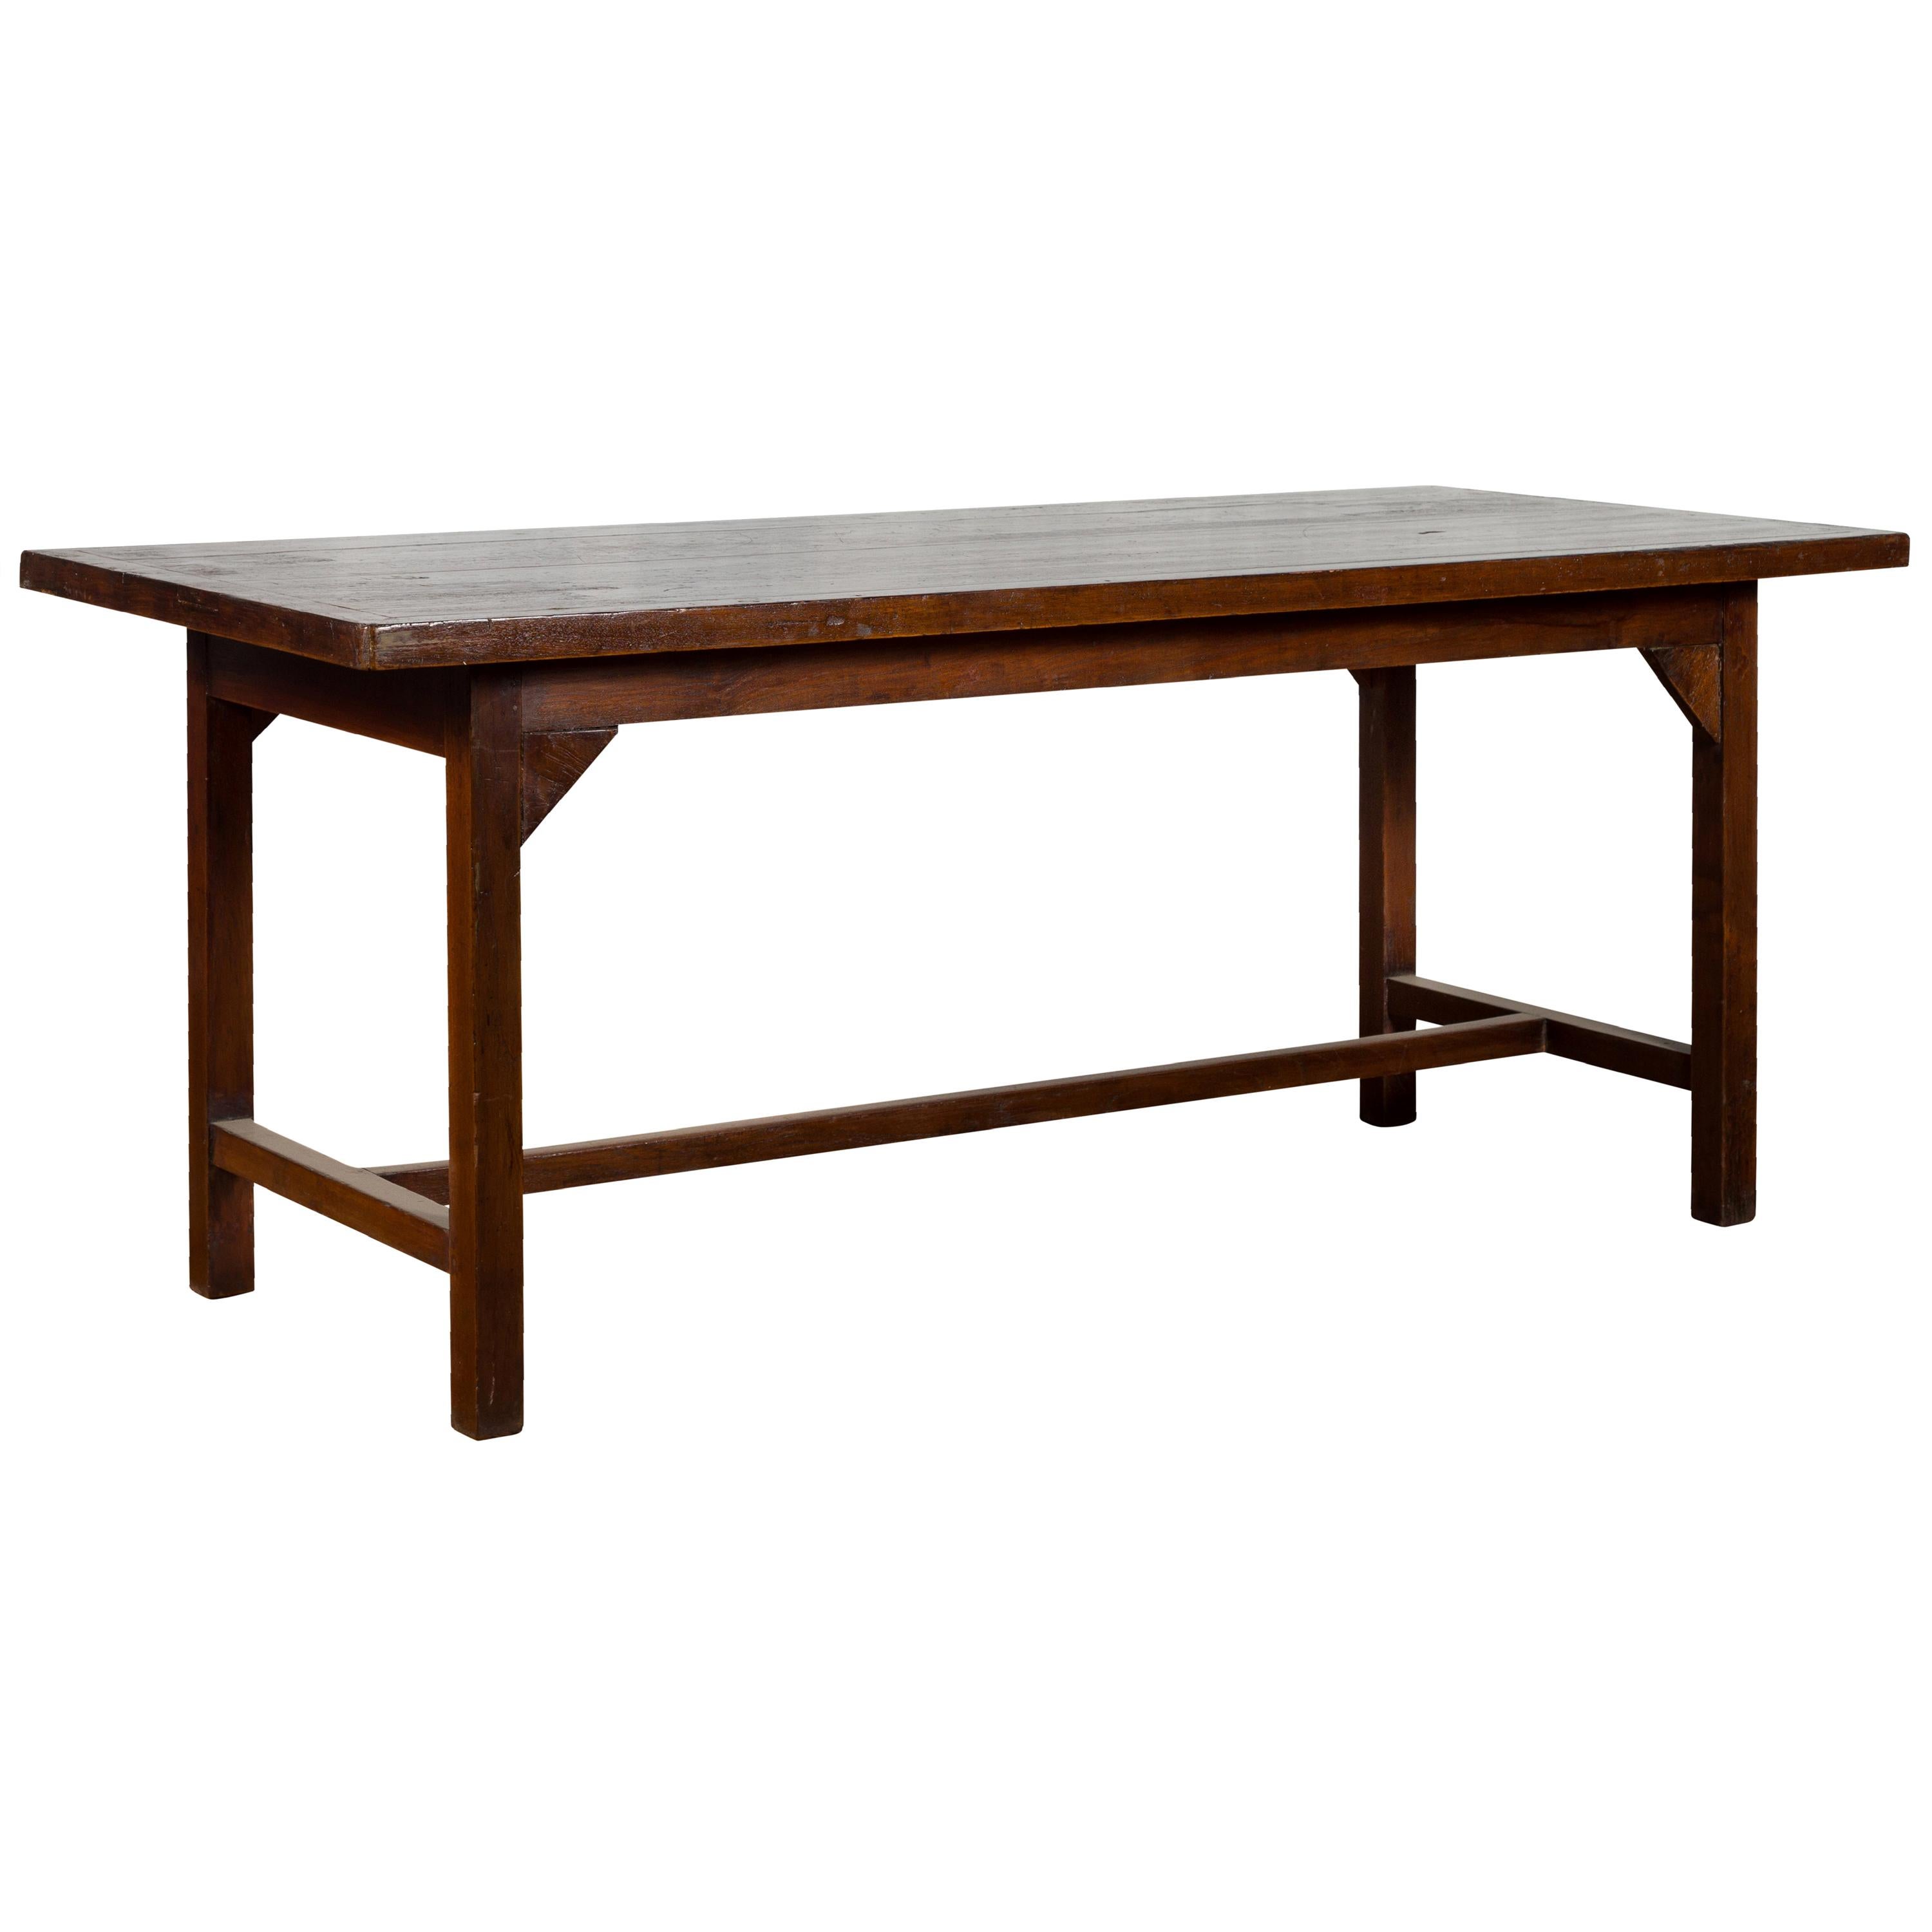 Indonesian 20th Century Table with Dark Brown Patina and H-Form Stretcher